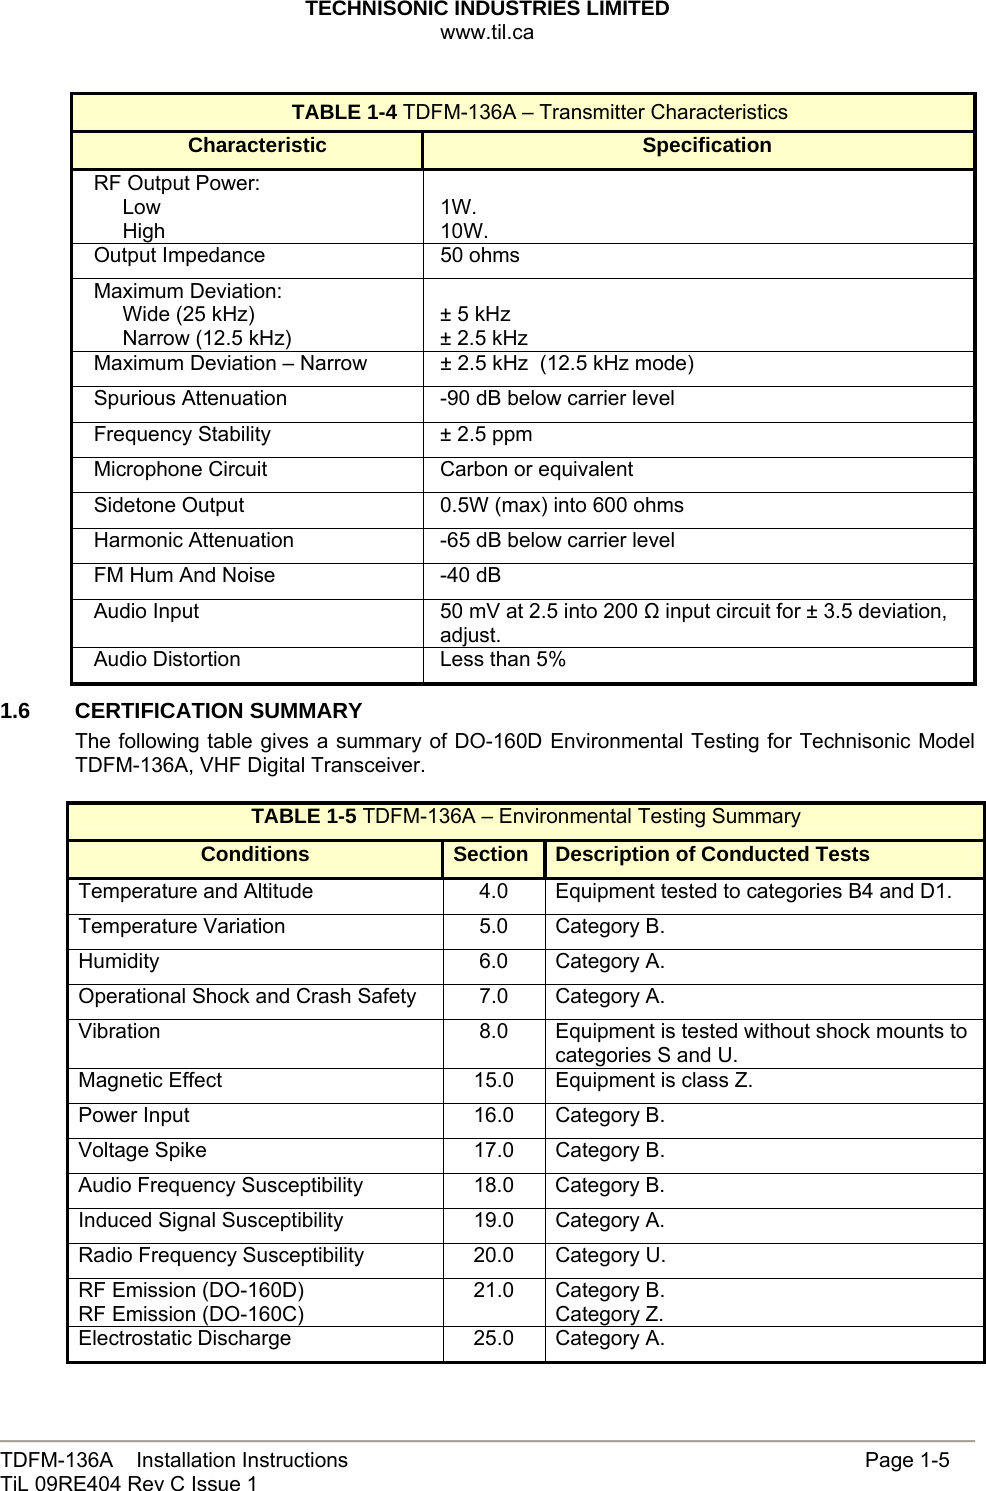 TECHNISONIC INDUSTRIES LIMITED www.til.ca   TDFM-136A    Installation Instructions                     Page 1-5 TiL 09RE404 Rev C Issue 1  TABLE 1-4 TDFM-136A – Transmitter Characteristics Characteristic Specification RF Output Power:      Low      High  1W. 10W. Output Impedance  50 ohms Maximum Deviation:      Wide (25 kHz)      Narrow (12.5 kHz)  ± 5 kHz  ± 2.5 kHz Maximum Deviation – Narrow  ± 2.5 kHz  (12.5 kHz mode) Spurious Attenuation  -90 dB below carrier level Frequency Stability  ± 2.5 ppm Microphone Circuit  Carbon or equivalent Sidetone Output  0.5W (max) into 600 ohms Harmonic Attenuation  -65 dB below carrier level FM Hum And Noise  -40 dB Audio Input  50 mV at 2.5 into 200 Ω input circuit for ± 3.5 deviation, adjust. Audio Distortion  Less than 5% 1.6 CERTIFICATION SUMMARY The following table gives a summary of DO-160D Environmental Testing for Technisonic Model TDFM-136A, VHF Digital Transceiver.   TABLE 1-5 TDFM-136A – Environmental Testing Summary Conditions  Section  Description of Conducted Tests Temperature and Altitude  4.0  Equipment tested to categories B4 and D1. Temperature Variation  5.0  Category B. Humidity 6.0 Category A. Operational Shock and Crash Safety 7.0 Category A. Vibration  8.0  Equipment is tested without shock mounts to categories S and U. Magnetic Effect  15.0  Equipment is class Z. Power Input  16.0  Category B. Voltage Spike  17.0  Category B. Audio Frequency Susceptibility  18.0  Category B. Induced Signal Susceptibility  19.0  Category A. Radio Frequency Susceptibility  20.0  Category U. RF Emission (DO-160D) RF Emission (DO-160C) 21.0 Category B. Category Z. Electrostatic Discharge  25.0  Category A. 